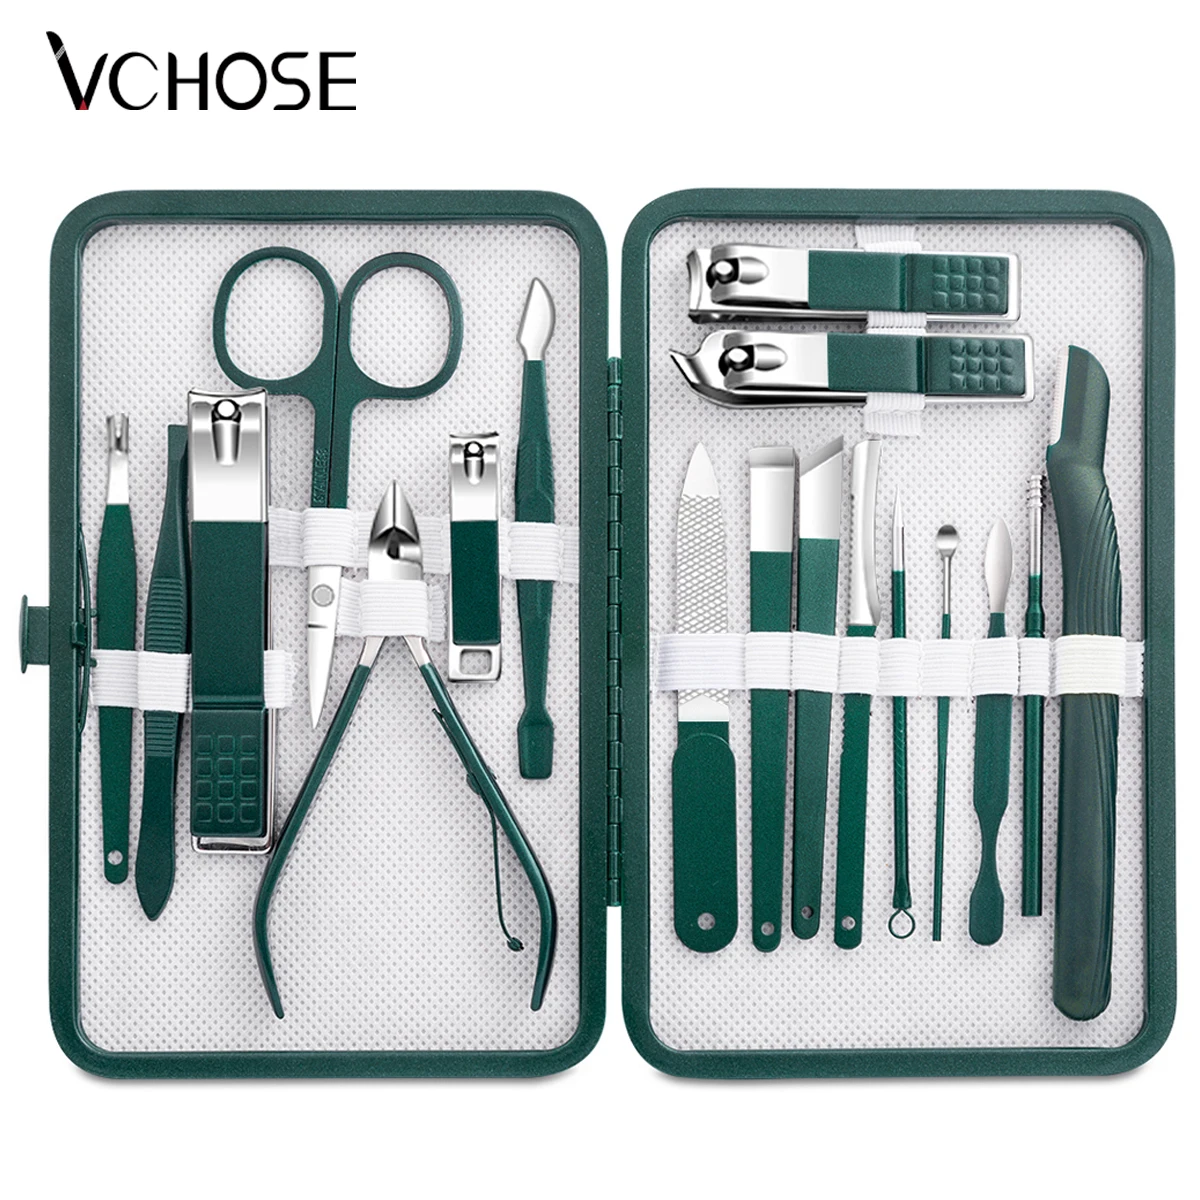 Stainless Steel Nail Clipper Set Grooming Tool Set With Portable Case Manicure Art Tool Green Nails Cut